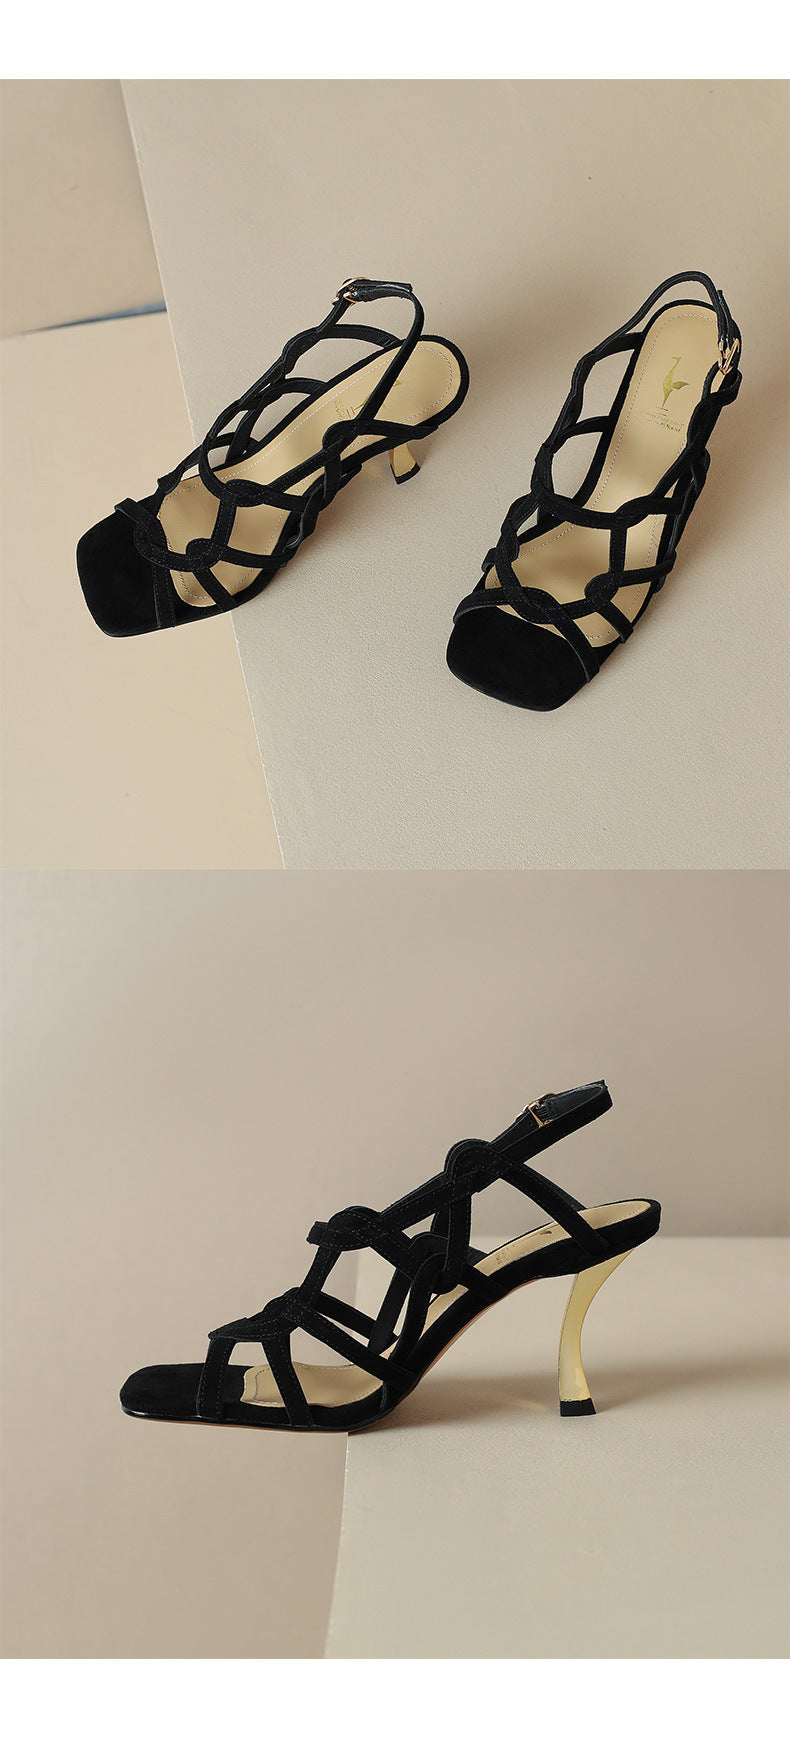 Summer Retro Hollow-out Roman Style Sandals High Heels